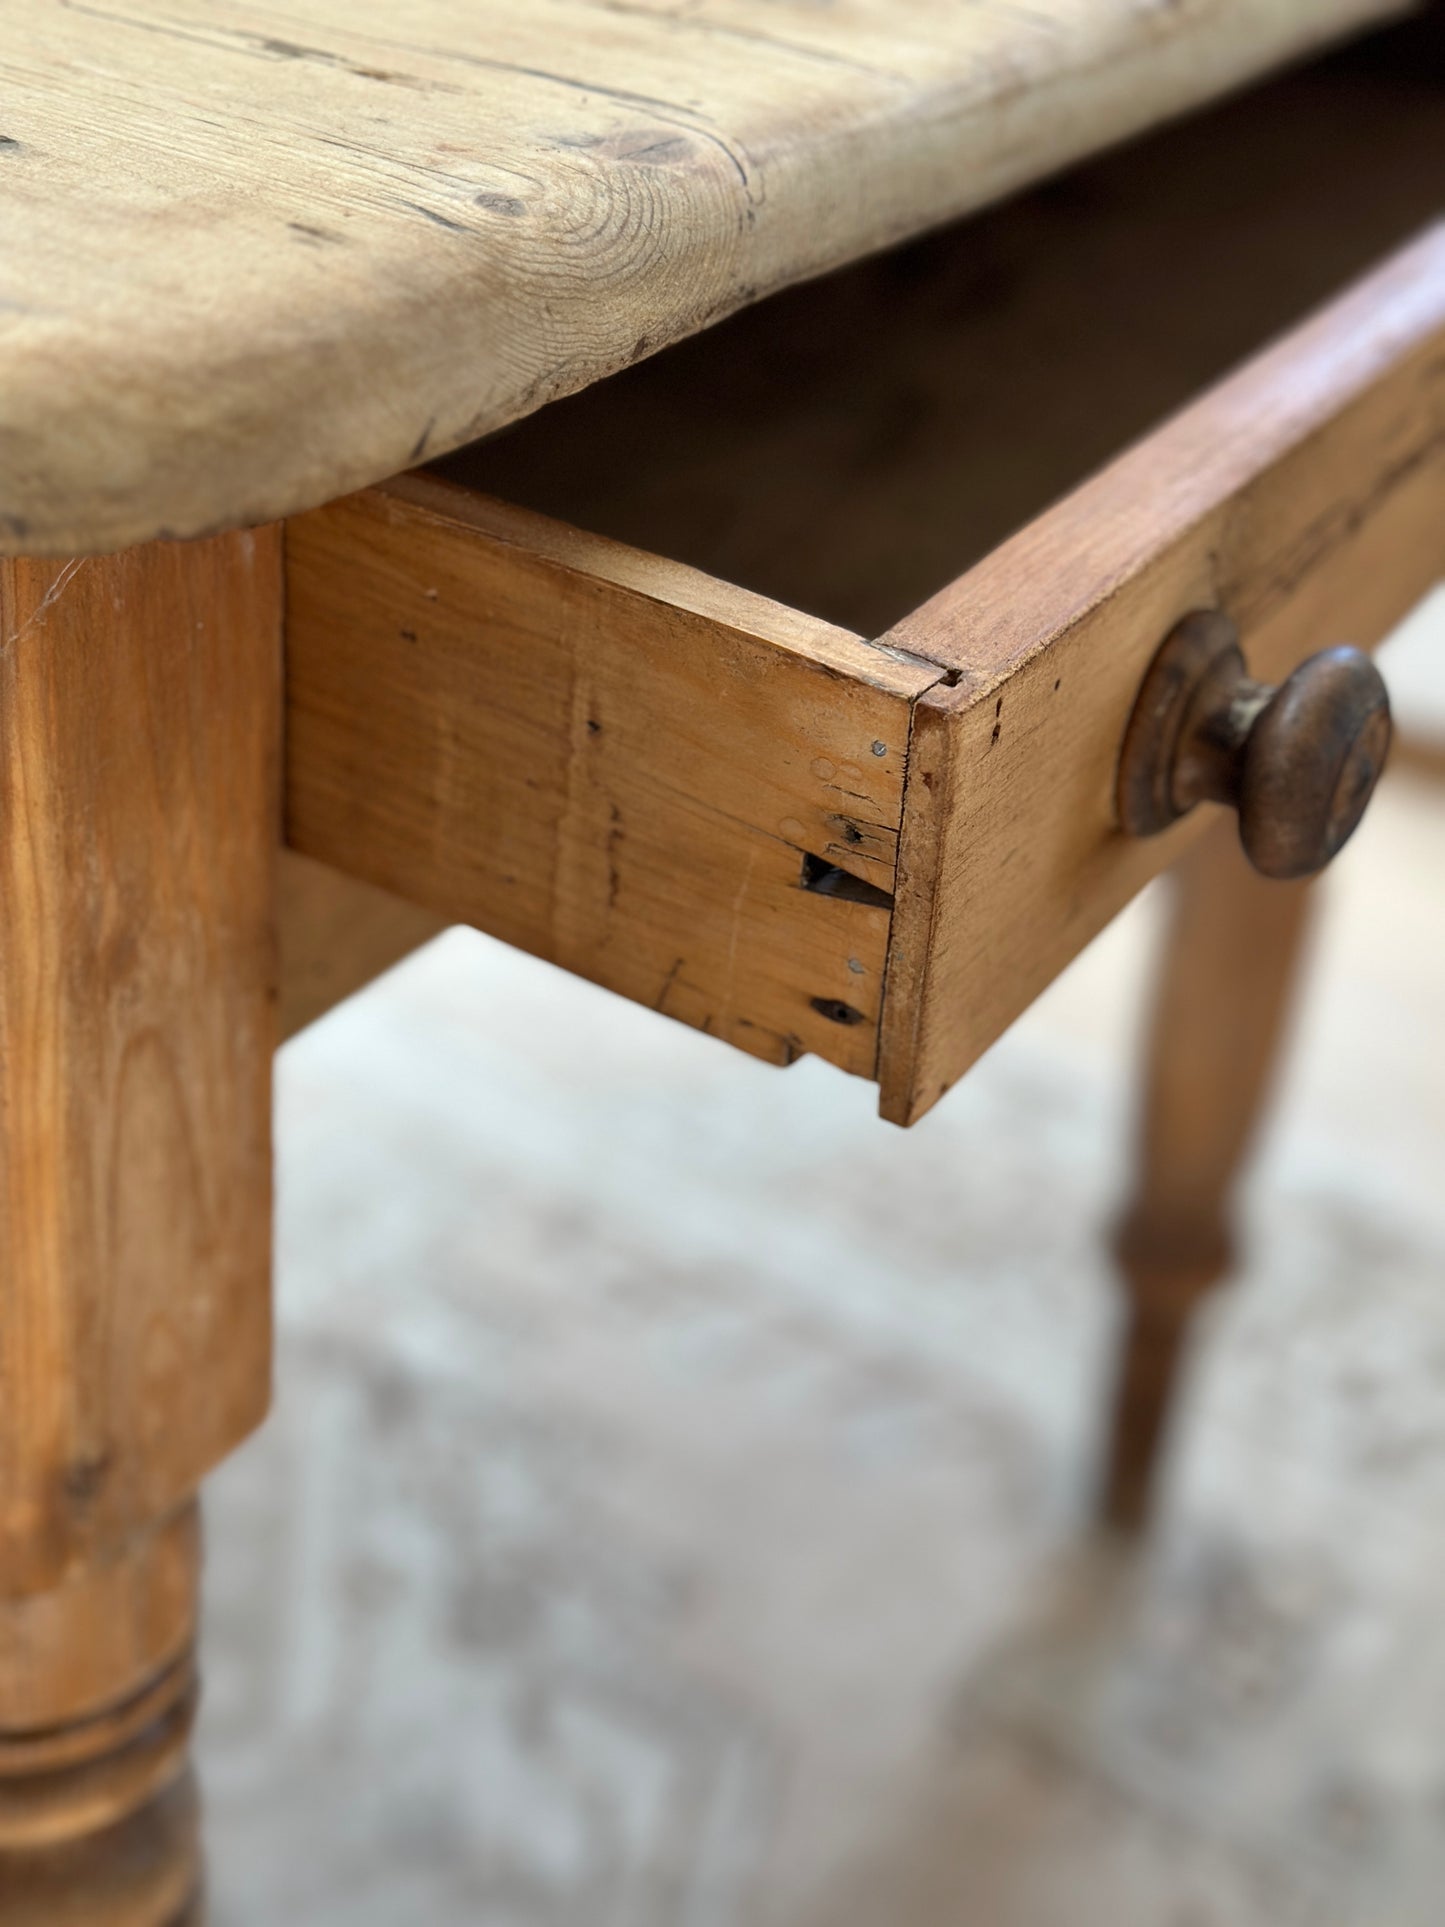 Antique English Pine Table